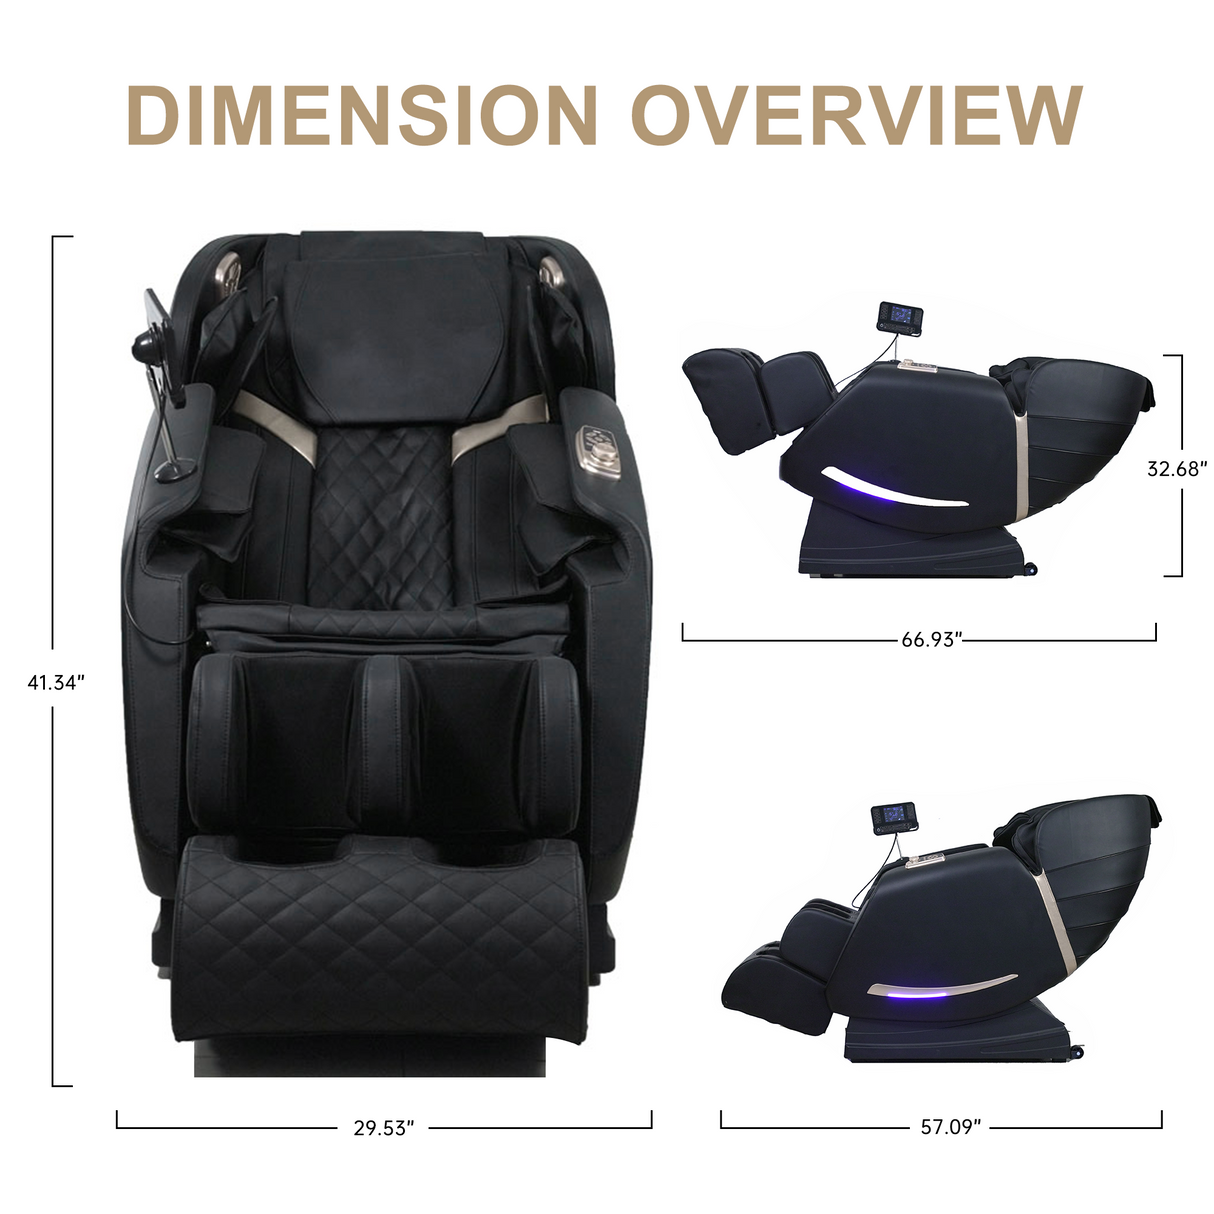 Full Body Massage Chair With Zero Gravity Recliner,with two control panel: Smart large screen & Rotary switch,spot kneading and Heating,Airbag coverage,Suitable for Home Office Home Elegance USA